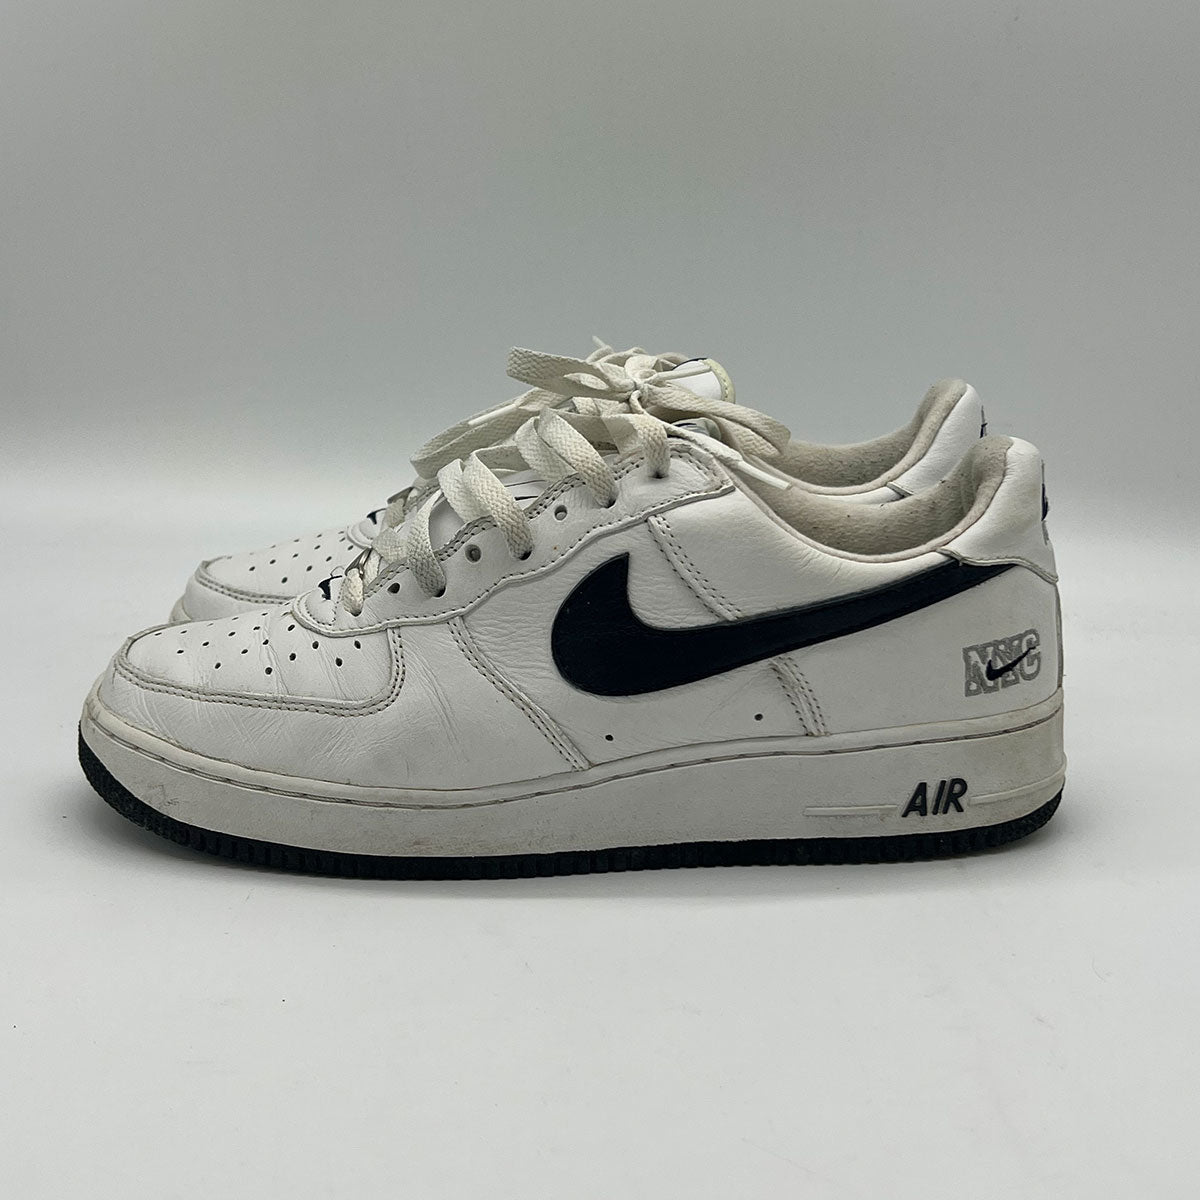 Nike Air Force 1 Low NYC White Obsidian size 10.5 (Pre-Owned) - KickzStore